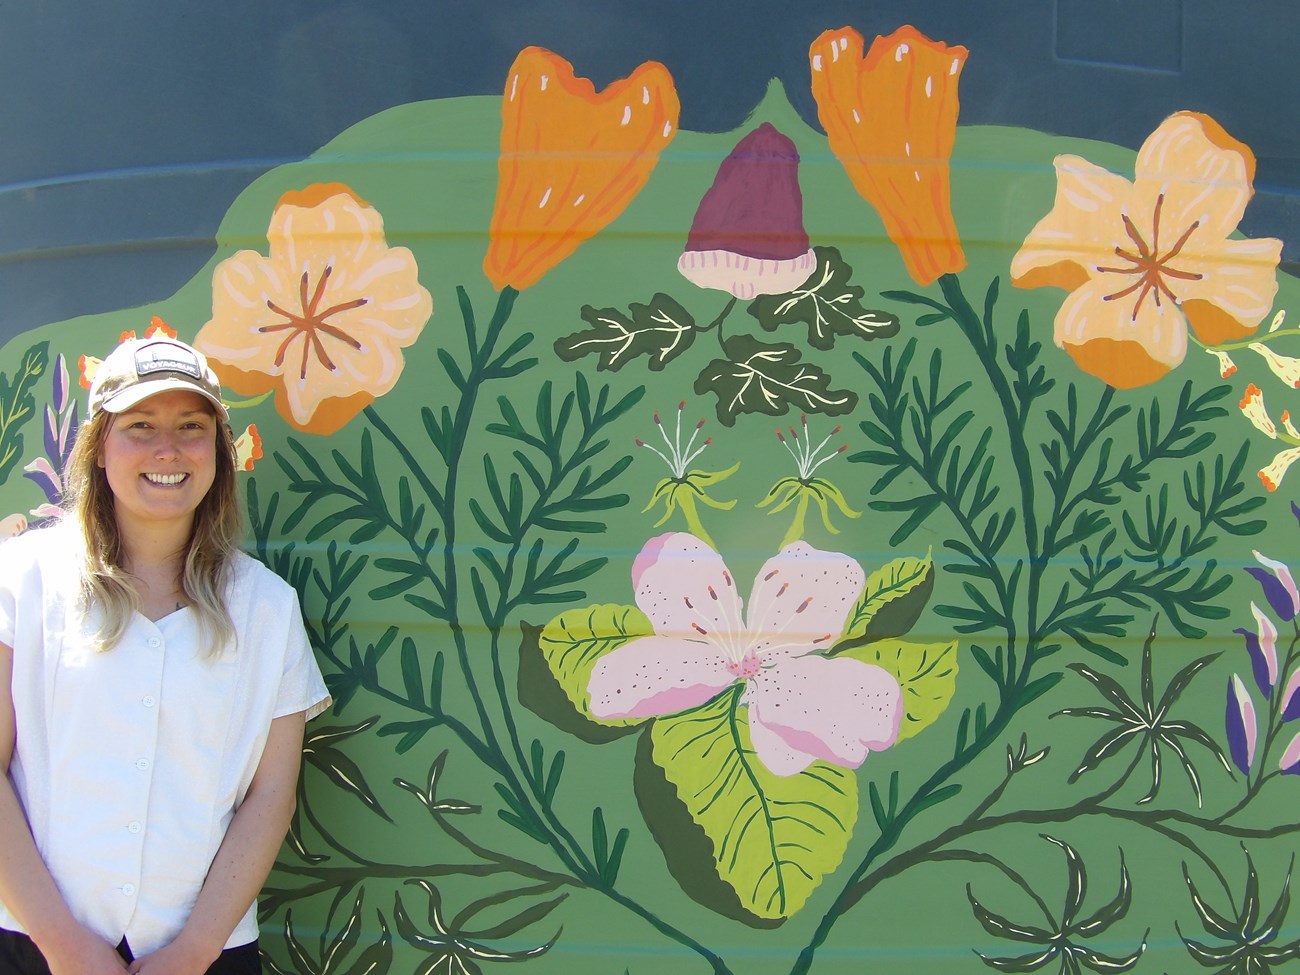 White female with long blonde hair and ballcap and white shirt standing in front of painting depicting orange and pink flowers and green leaves.